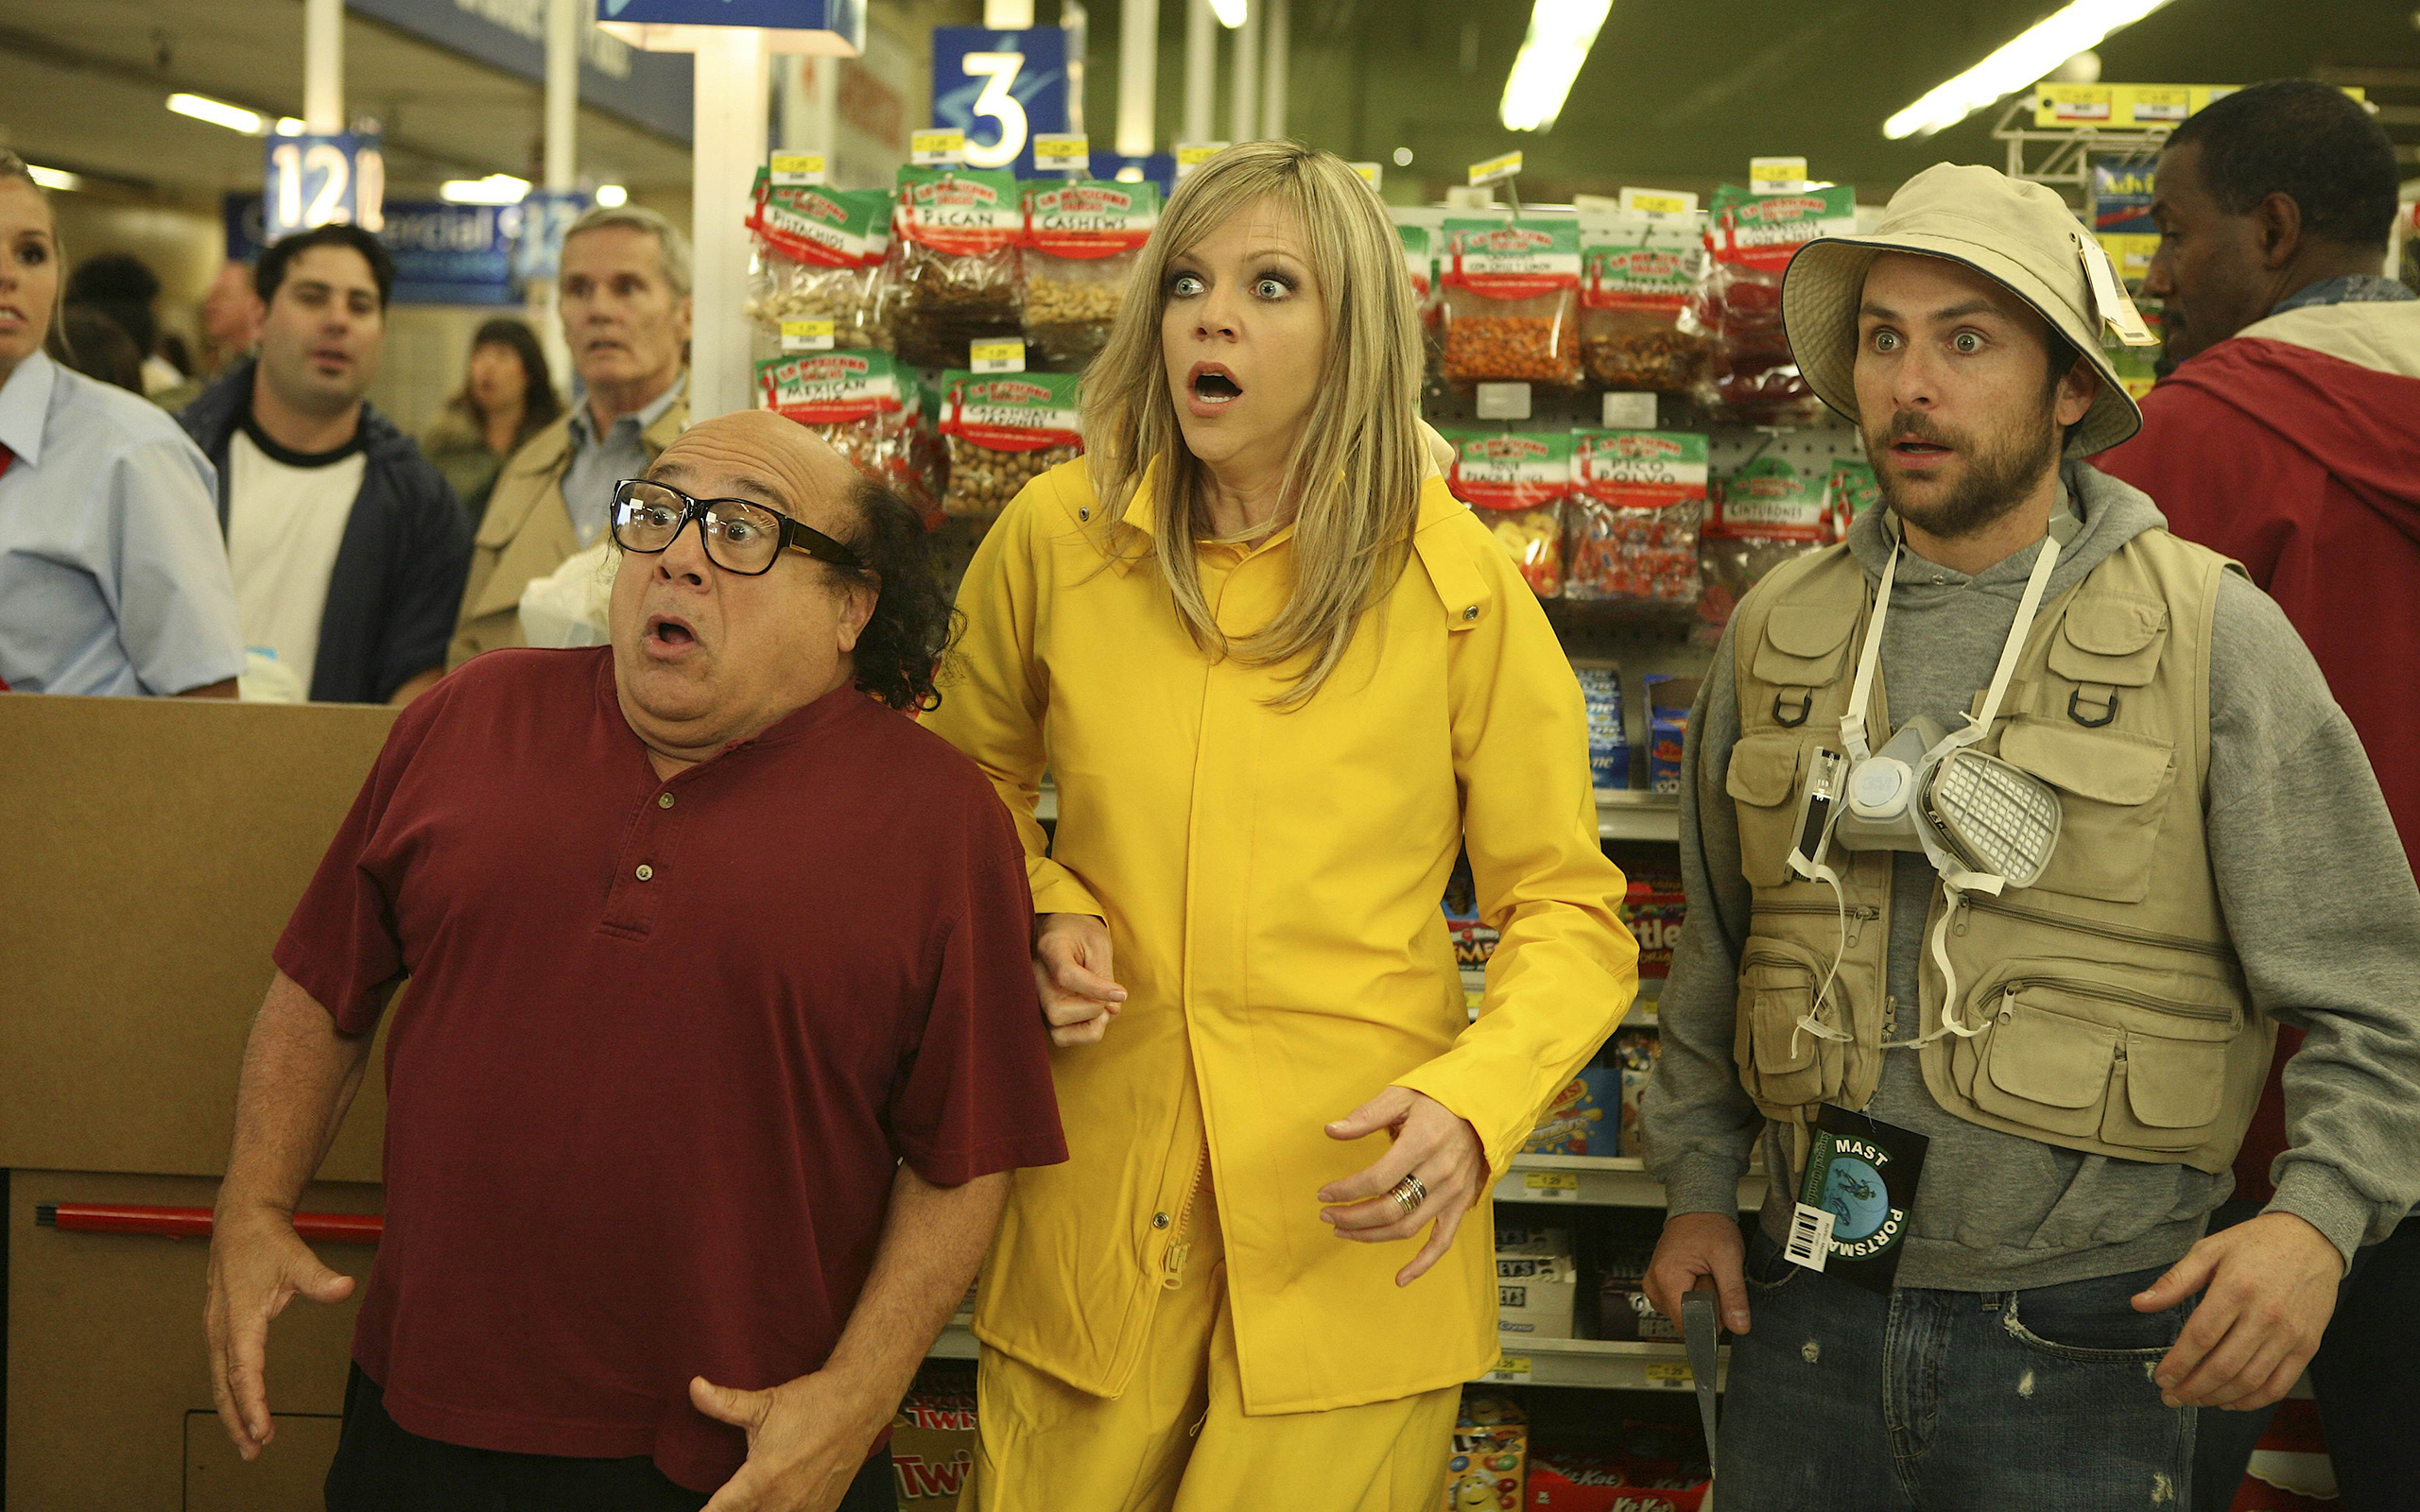 It's Always Sunny in Philadelphia (TV Series): Charlie Day, Kaitlin Olson, Danny DeVito, Sitcom characters, Premiered on FX. 2560x1600 HD Background.